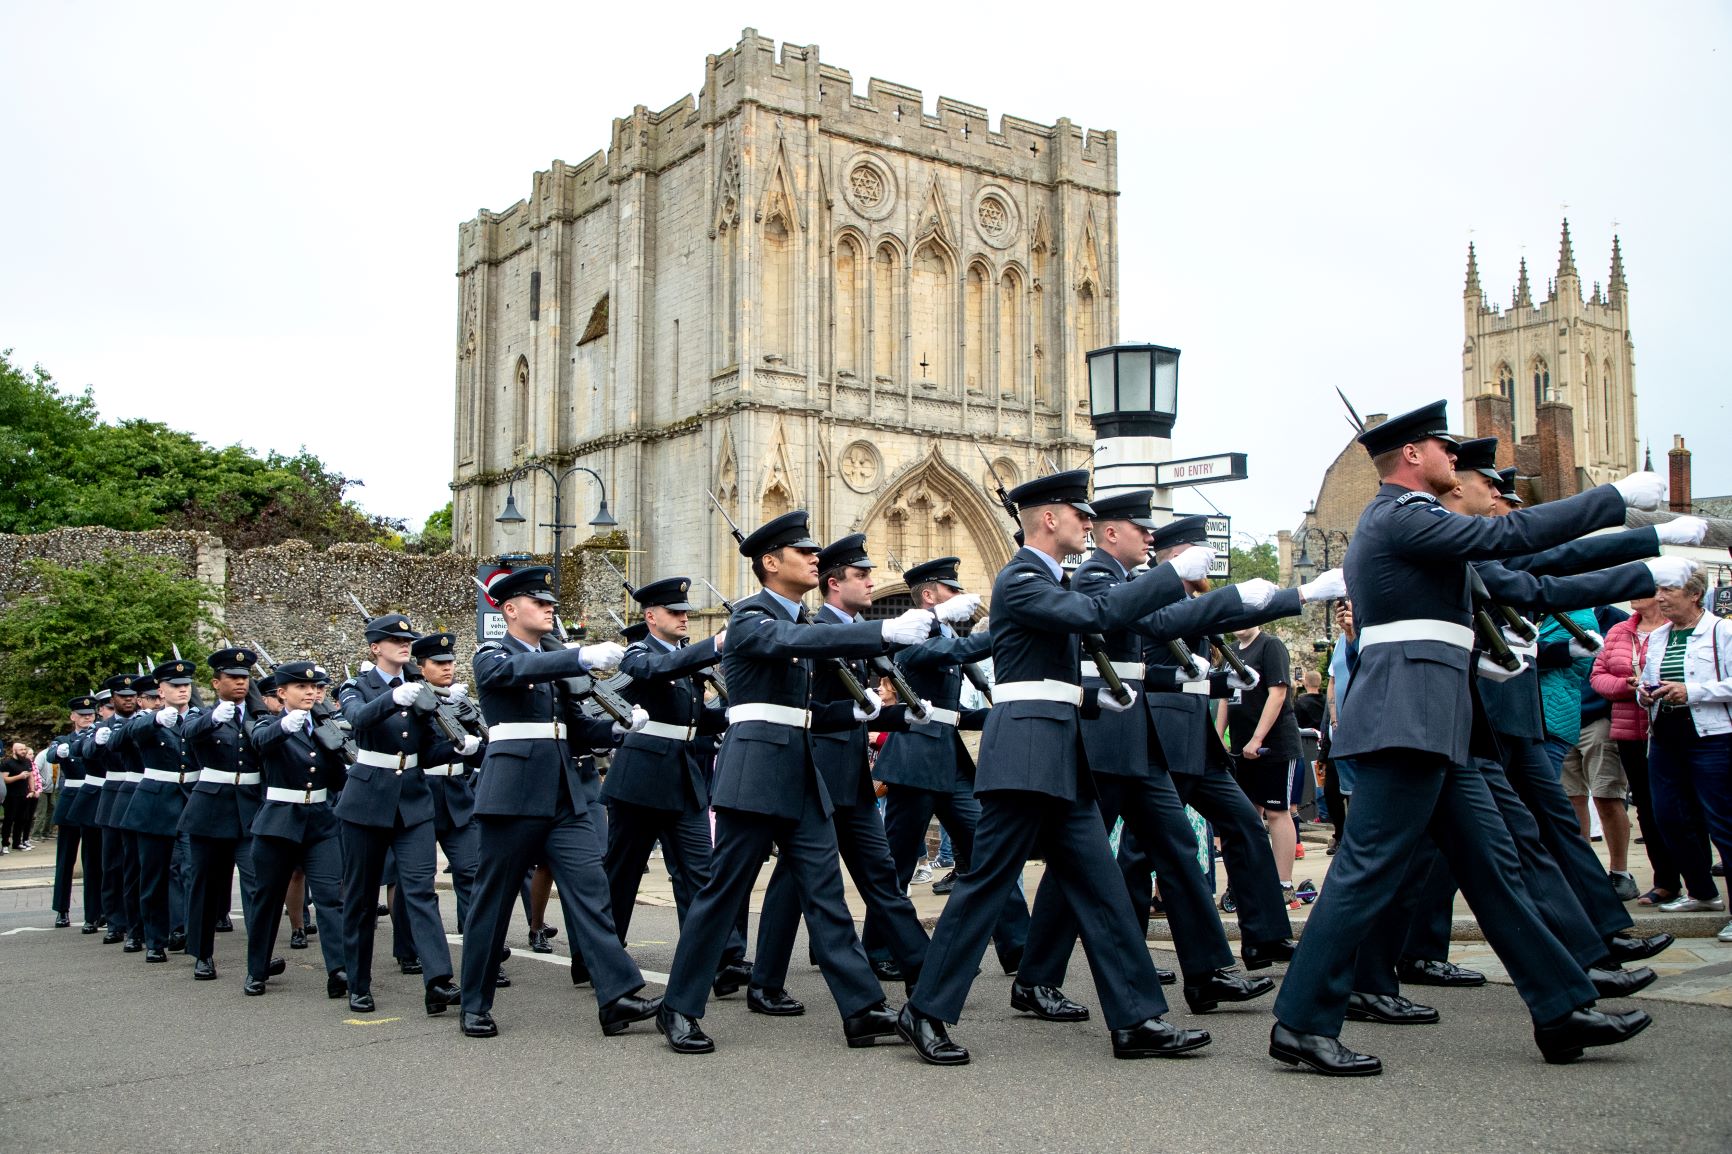 RAF Aviator parade past cathedral.